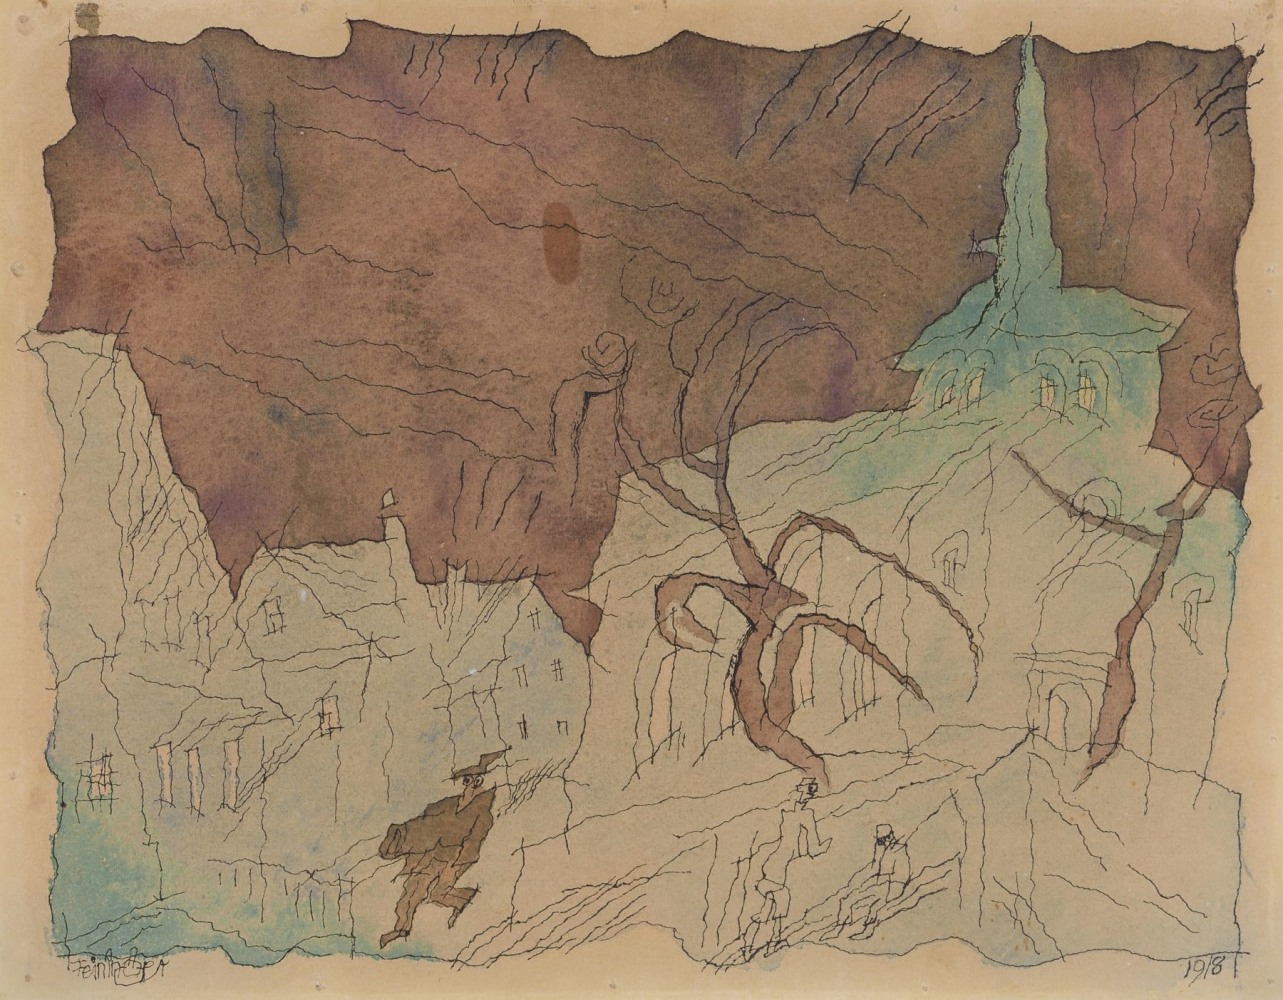 Lyonel Feininger (1871-1956)

(Taubach), 1918

Watercolor and ink on paper

9 1/8 x 12 in. (24 x 30.5 cm)

Signed lower left:&amp;nbsp;Feininger&amp;nbsp;

Dated lower right:&amp;nbsp;1918